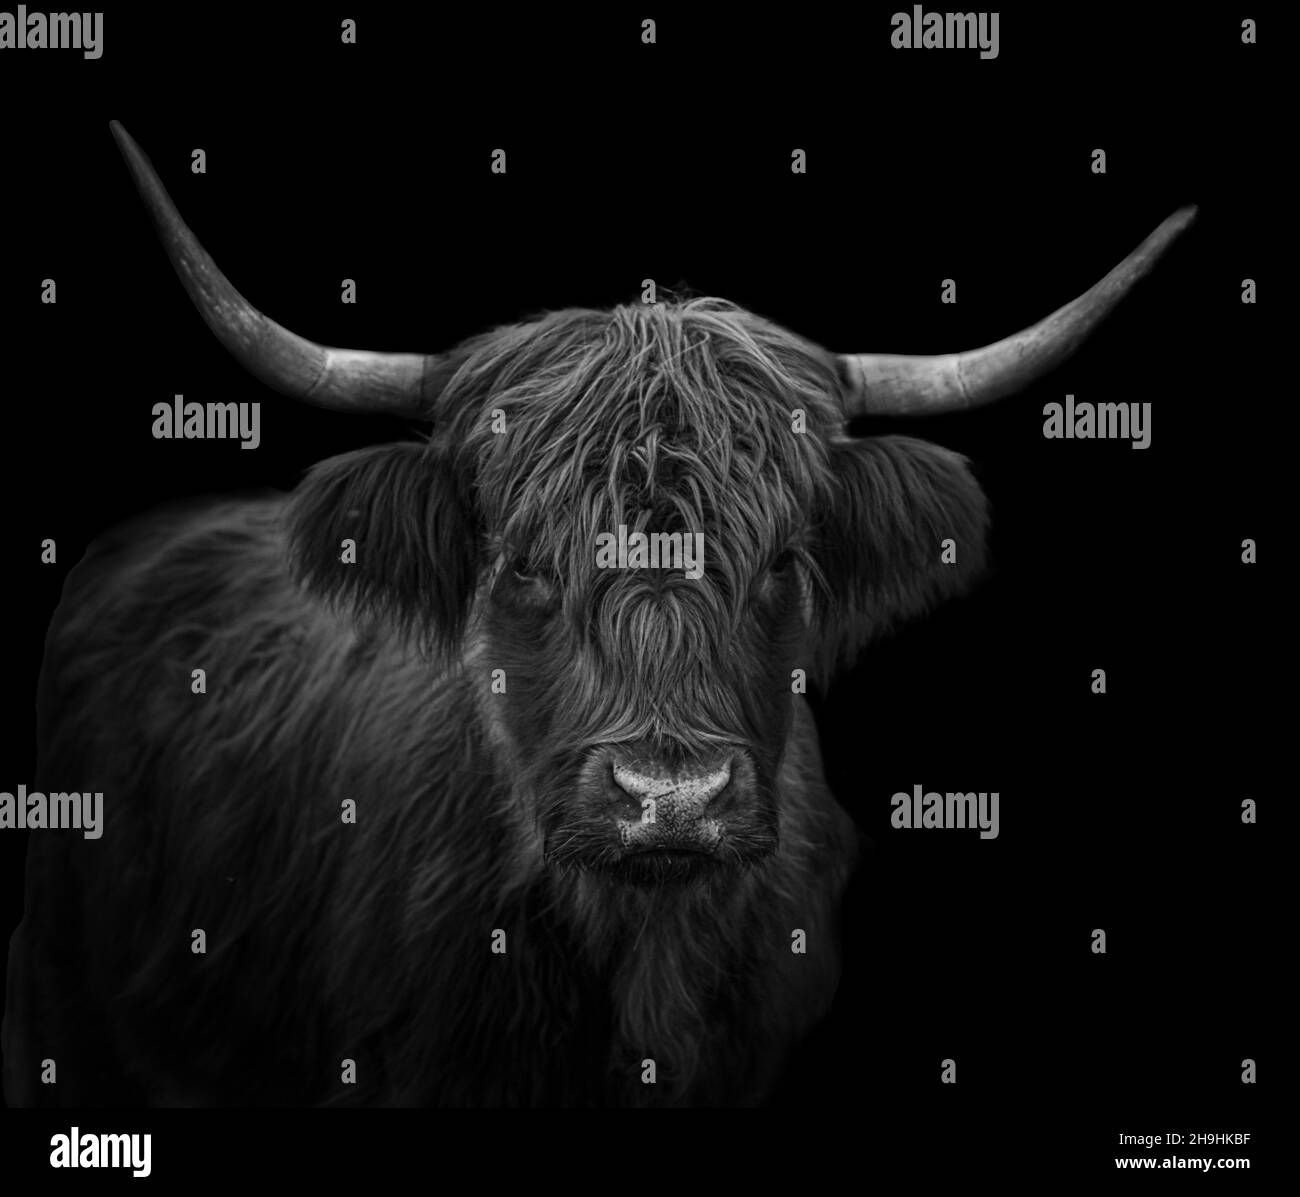 black and white portrait of a scottish highland cattle with dramatic lighting and black background Stock Photo